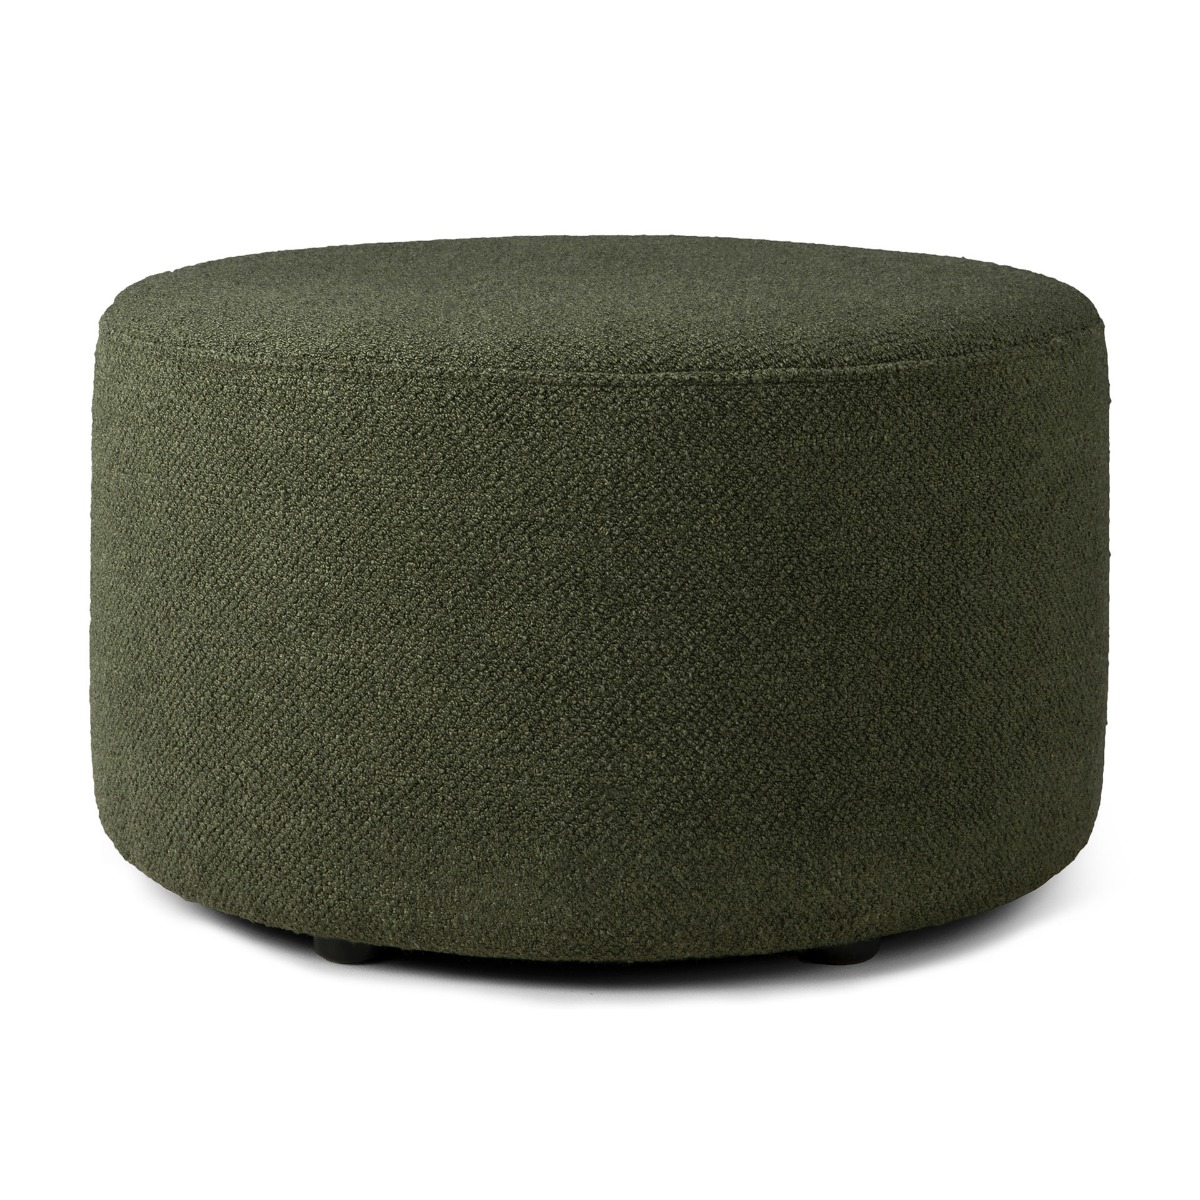 Barrow footstool Round in Pine Green